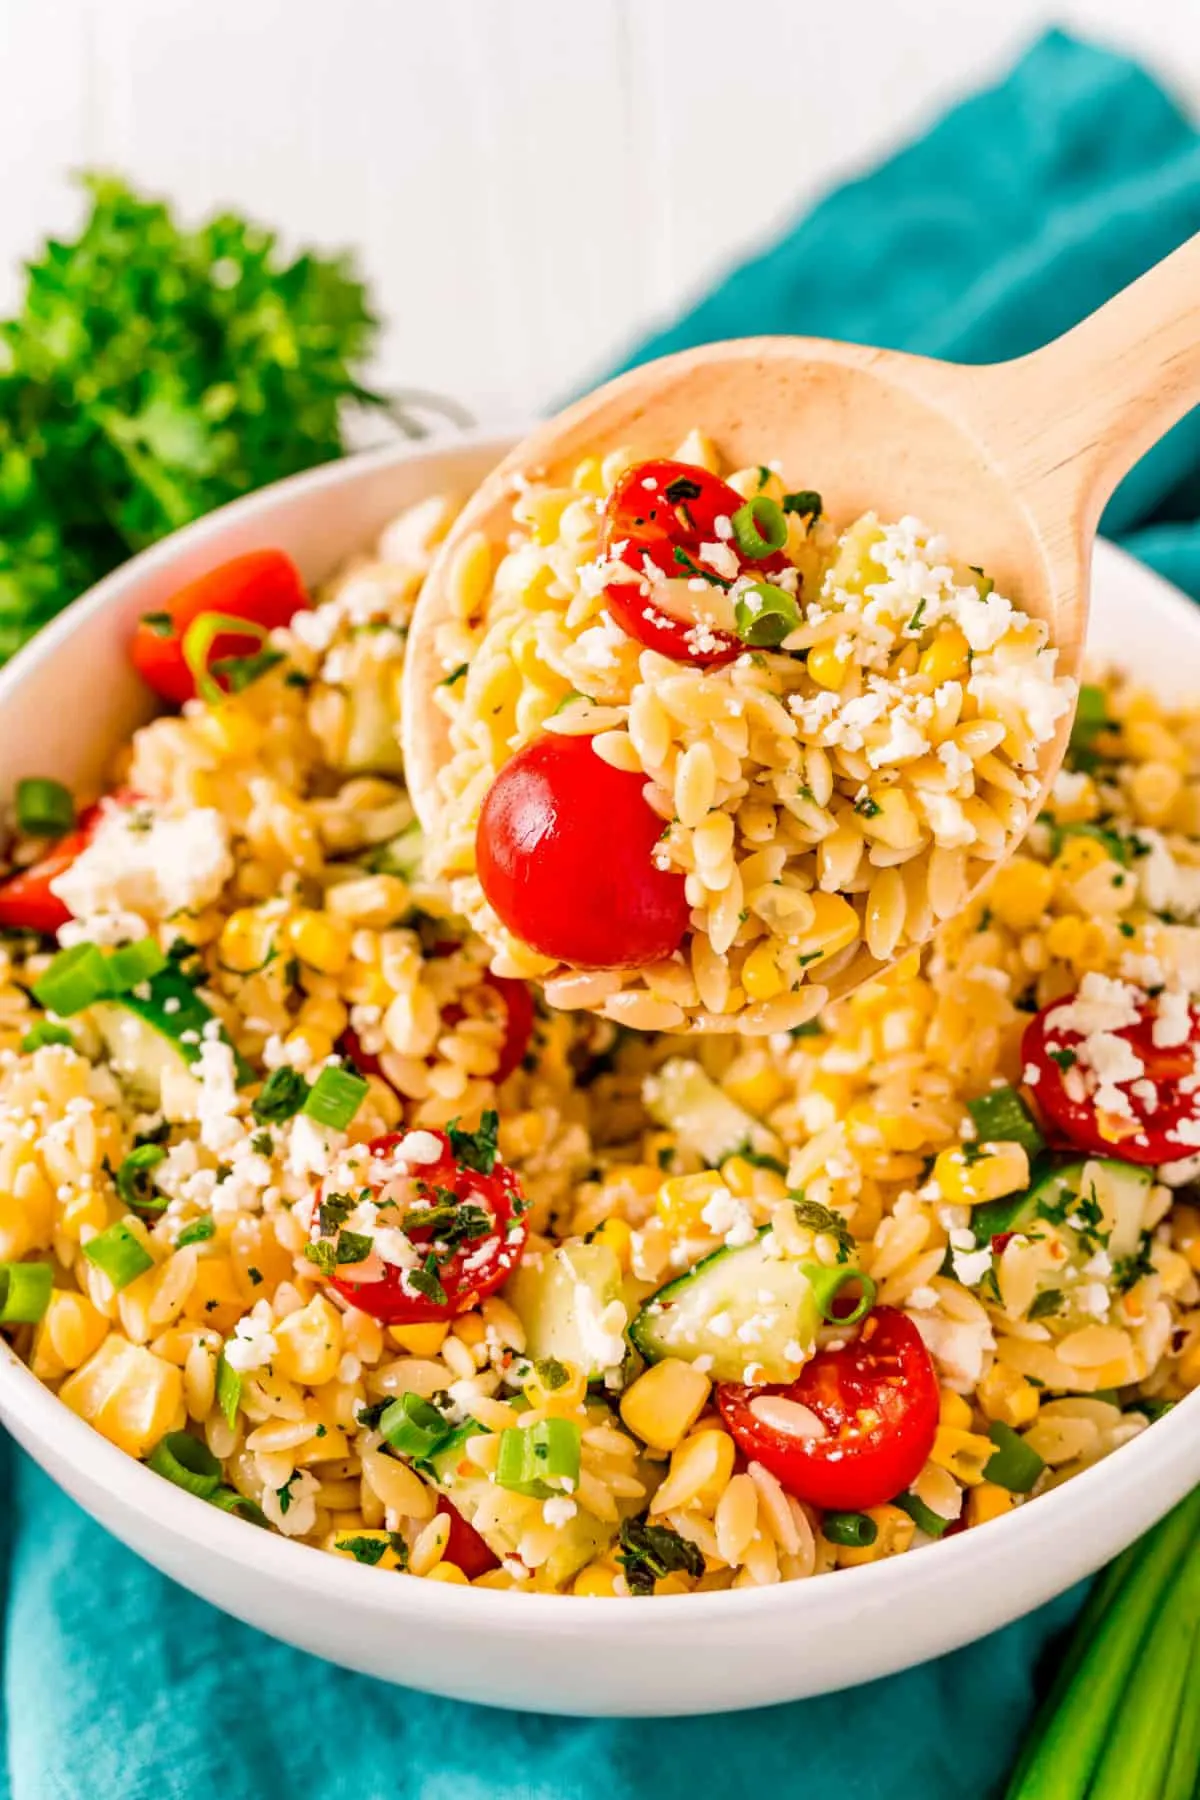 Orzo pasta salad with serving spoon